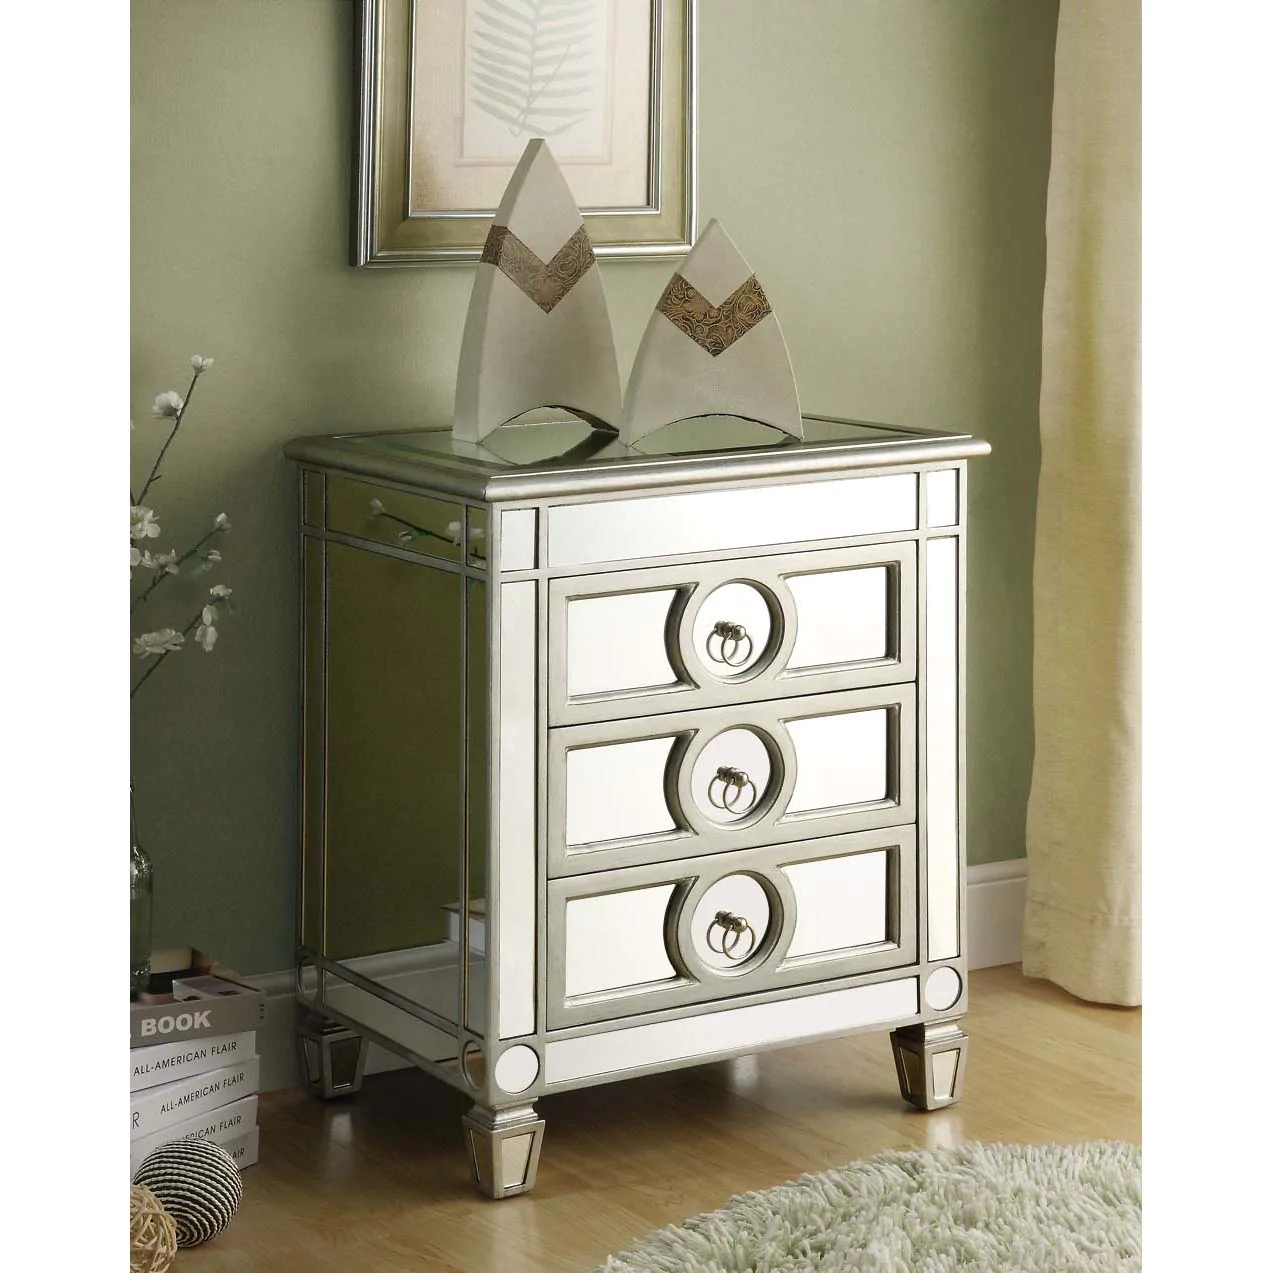 mirrored drawer accent table free shipping today with thumbnail ikea garden chairs west elm storage small drop leaf end narrow console shelves target white comforter coupon code